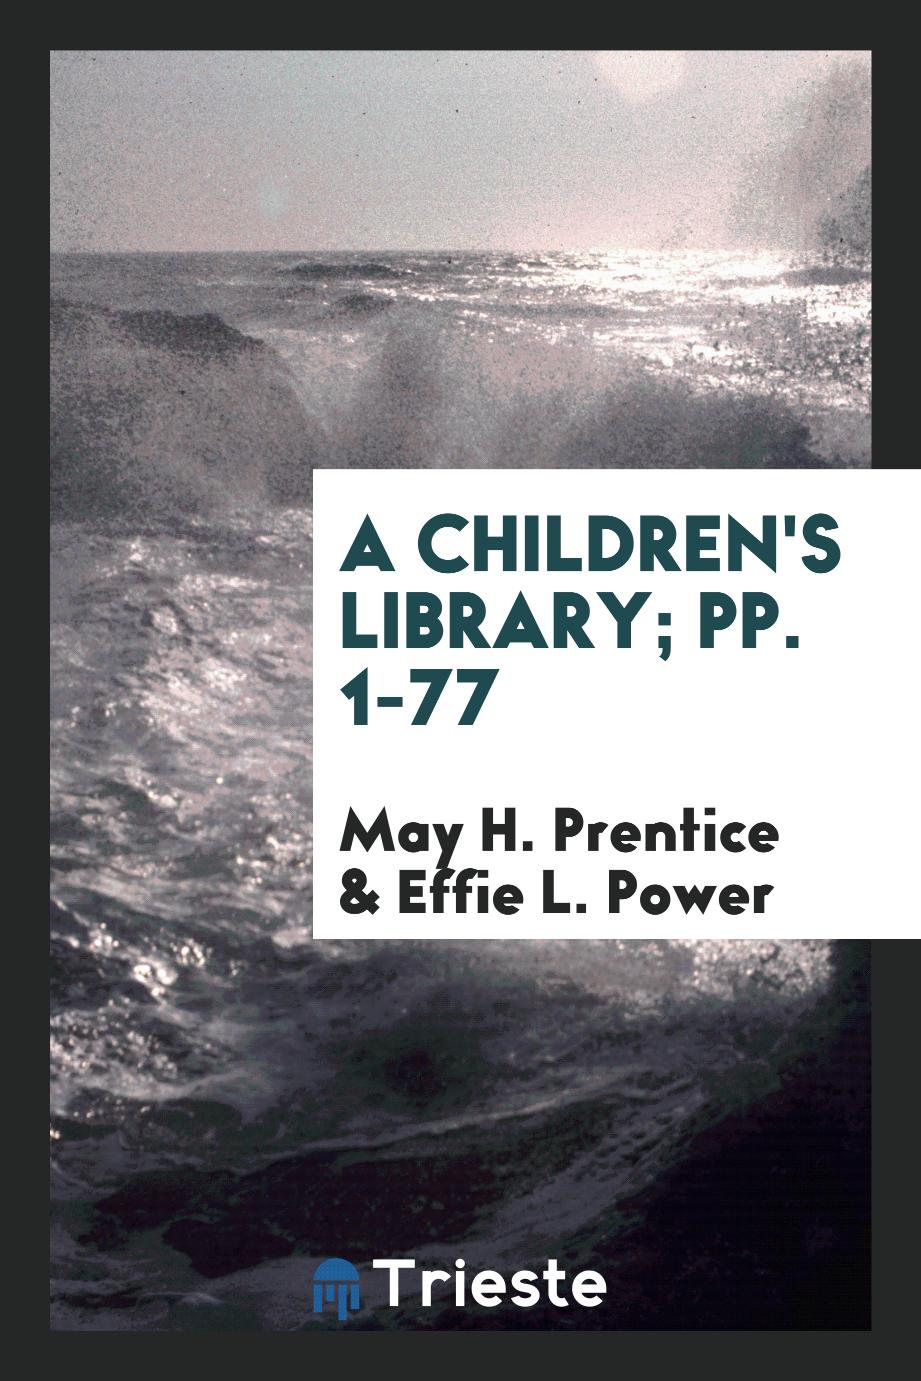 A Children's Library; pp. 1-77